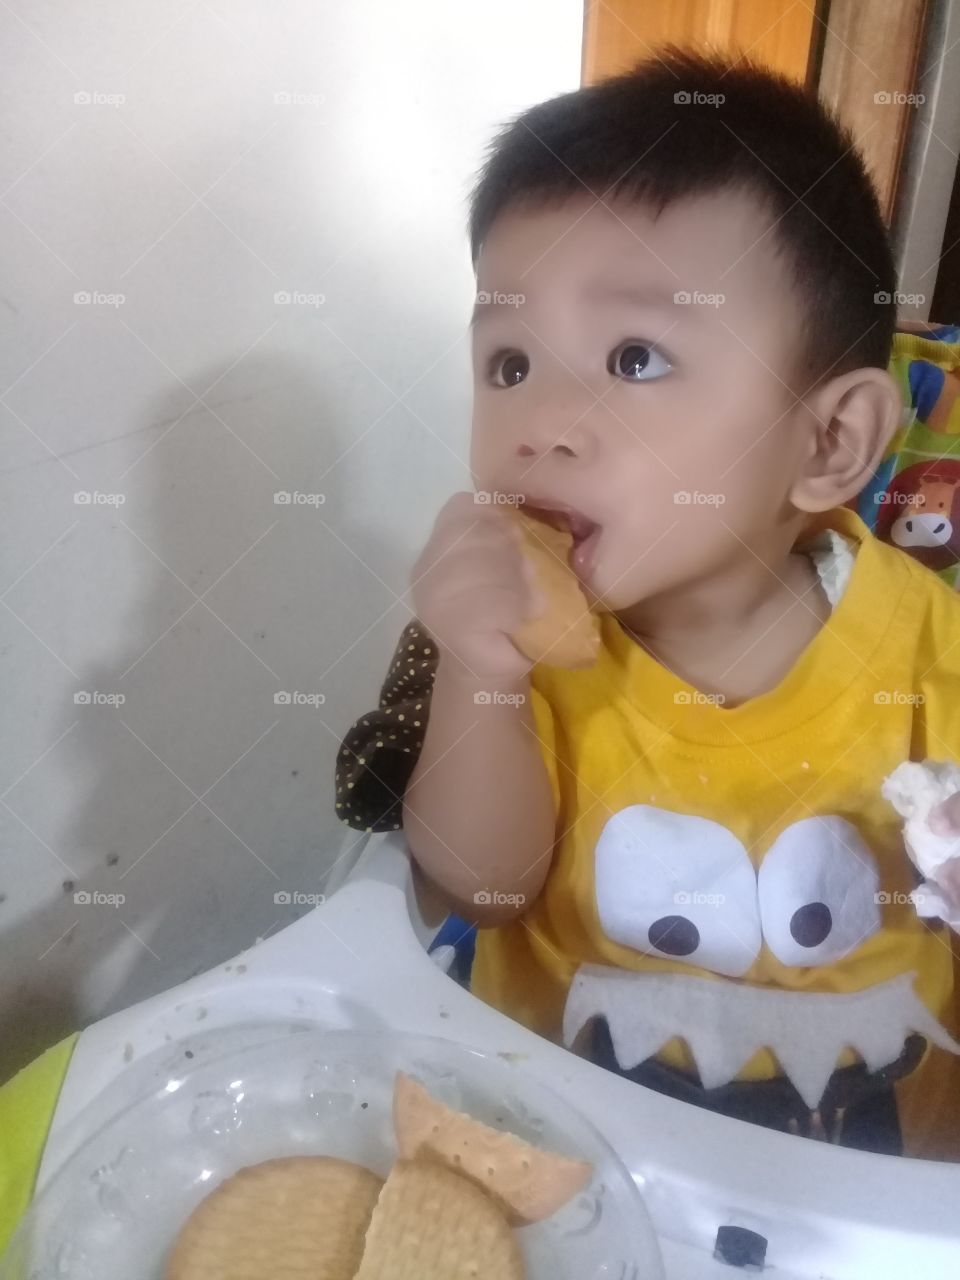 a baby eating biscuits